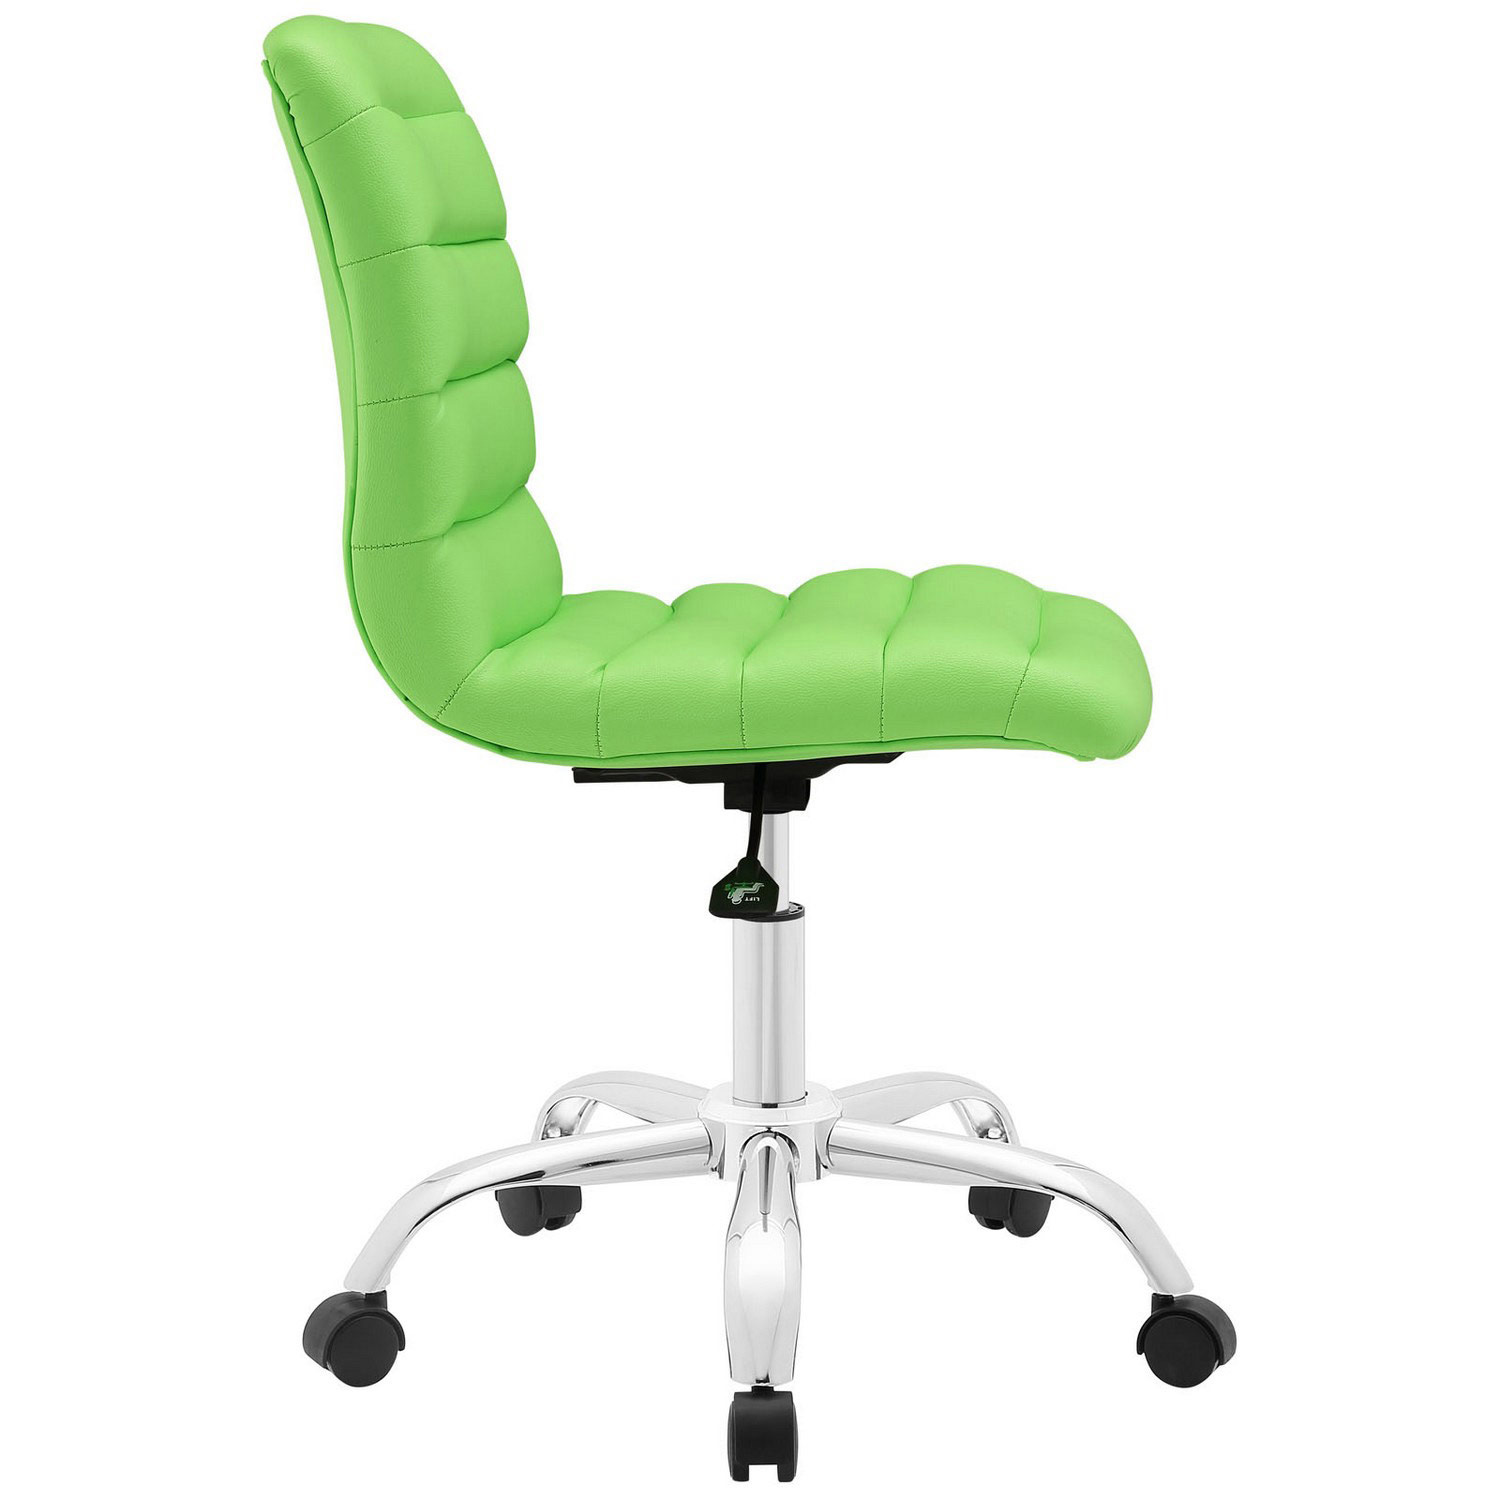 Modway Ripple Armless Mid Back Office Chair - Bright Green